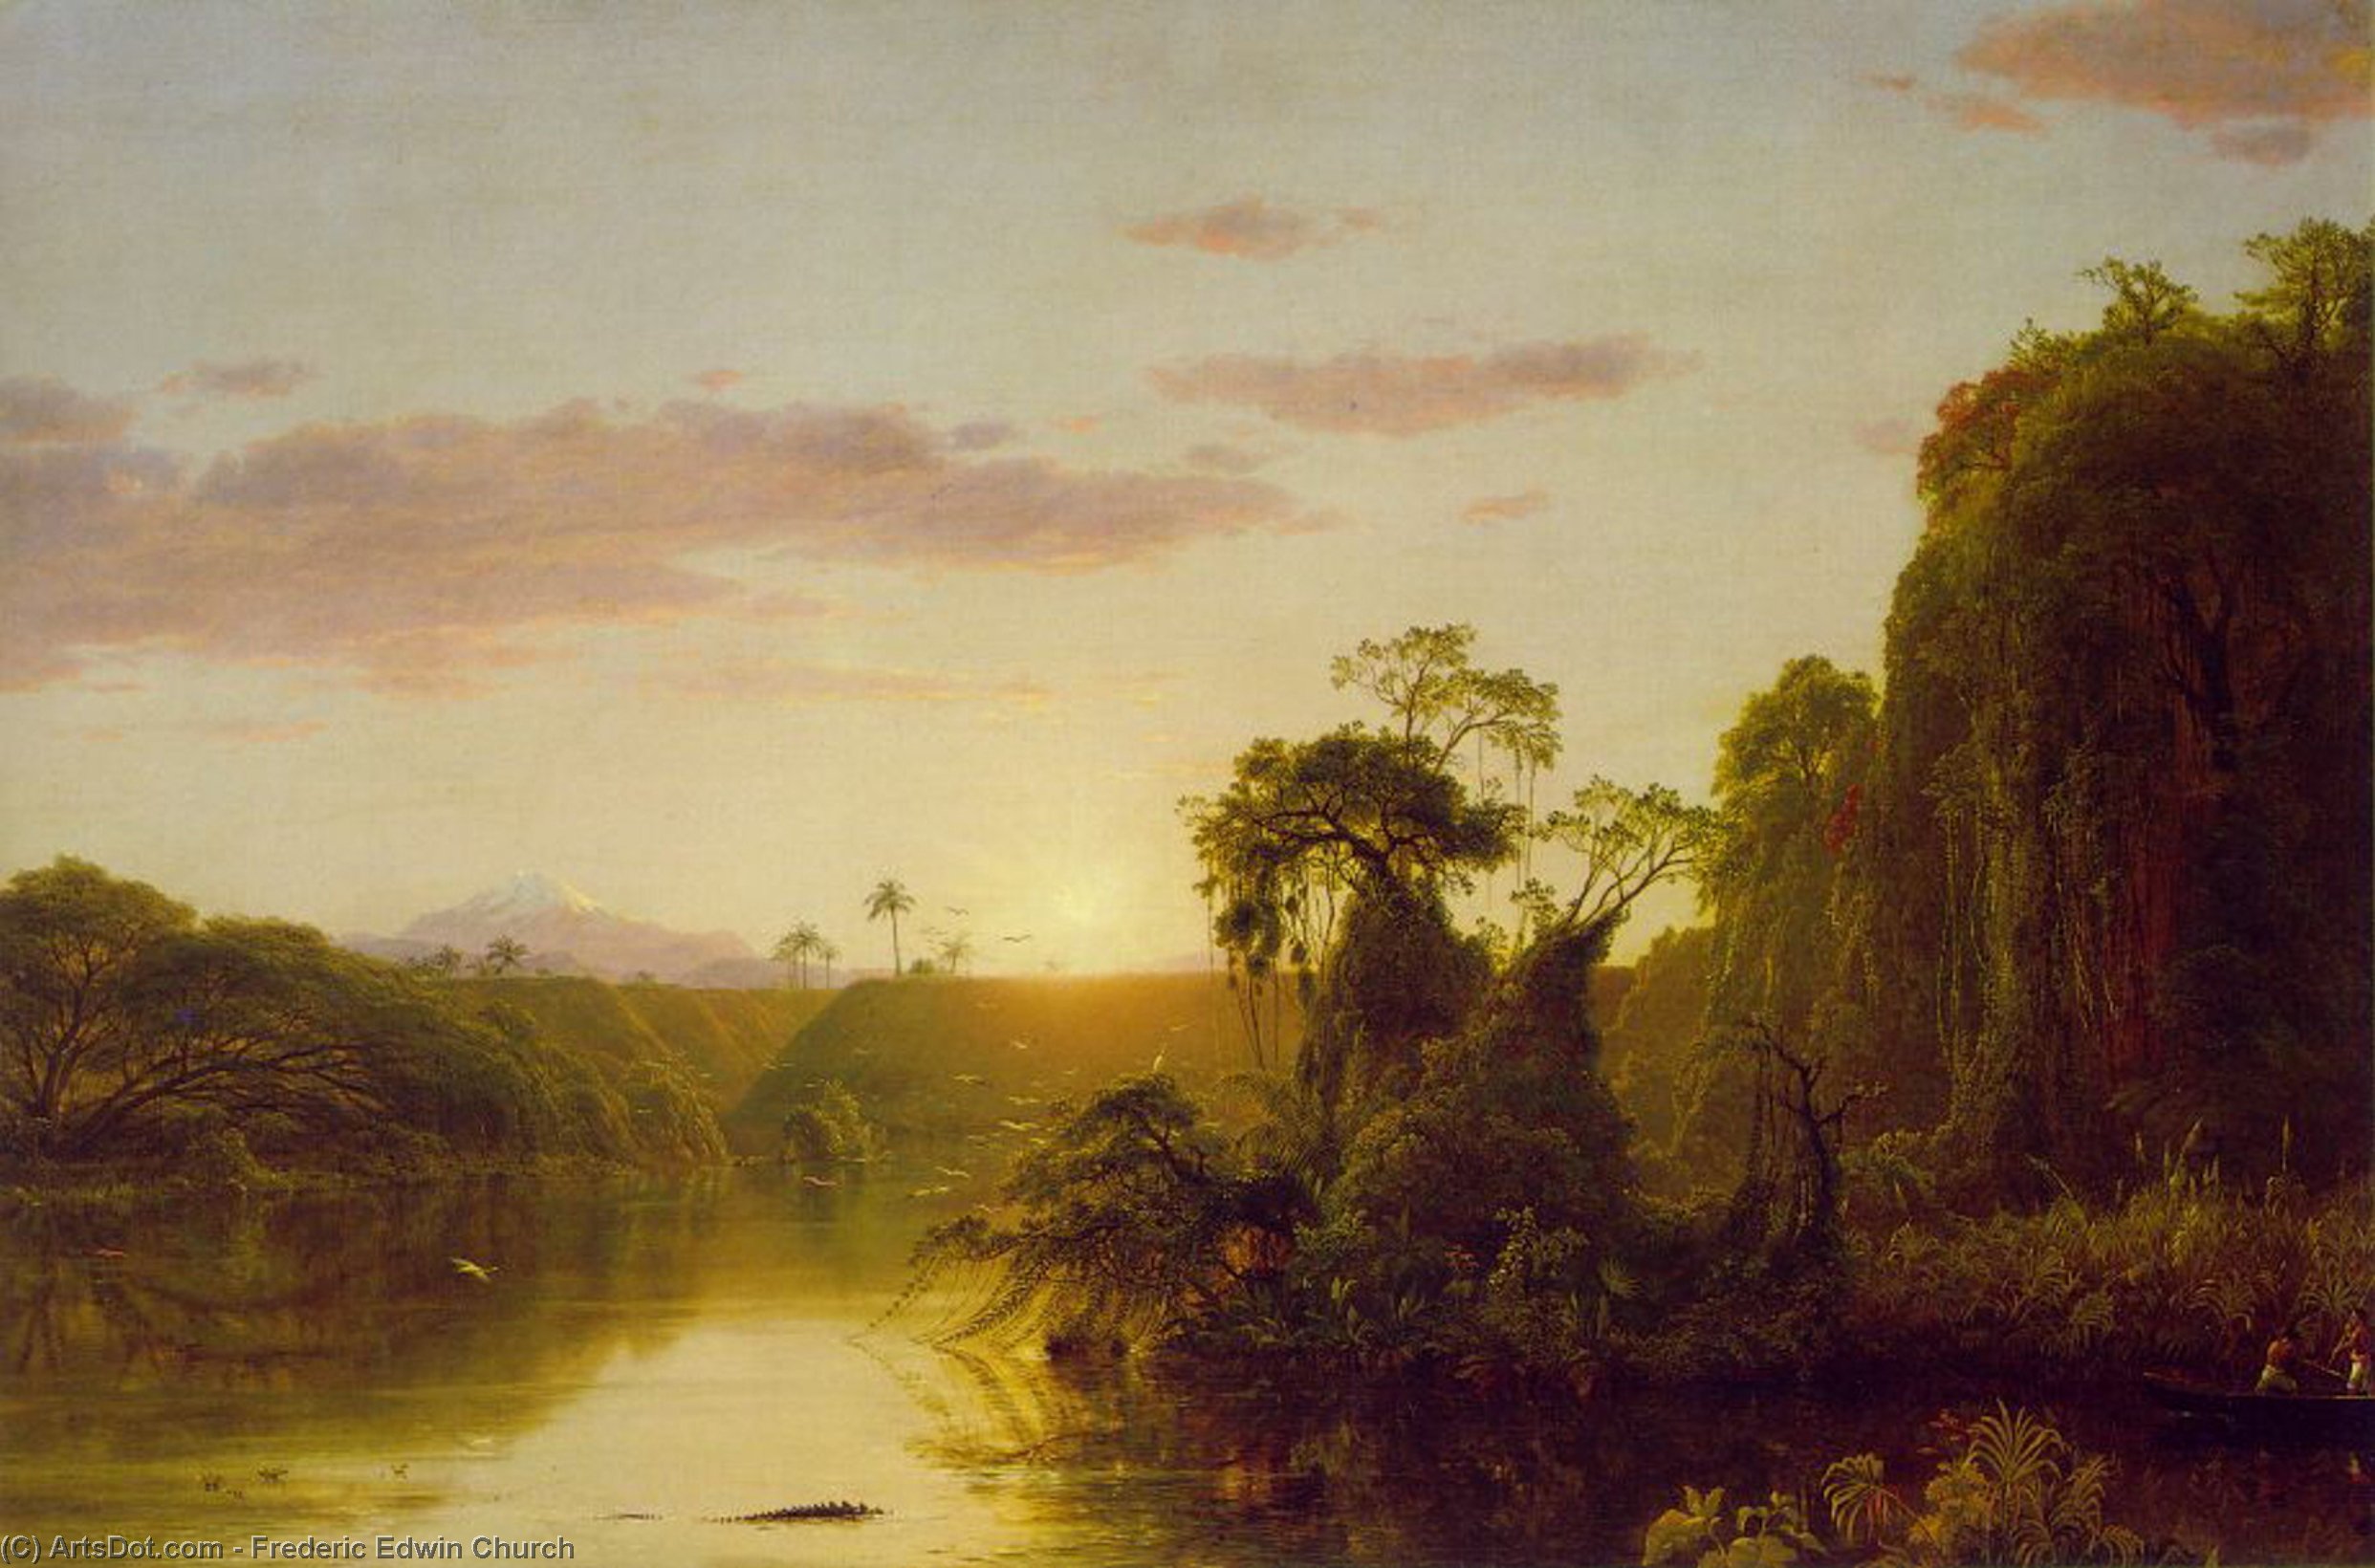 WikiOO.org - 백과 사전 - 회화, 삽화 Frederic Edwin Church - La Magdalena (also known as Scene on the Magdalena)